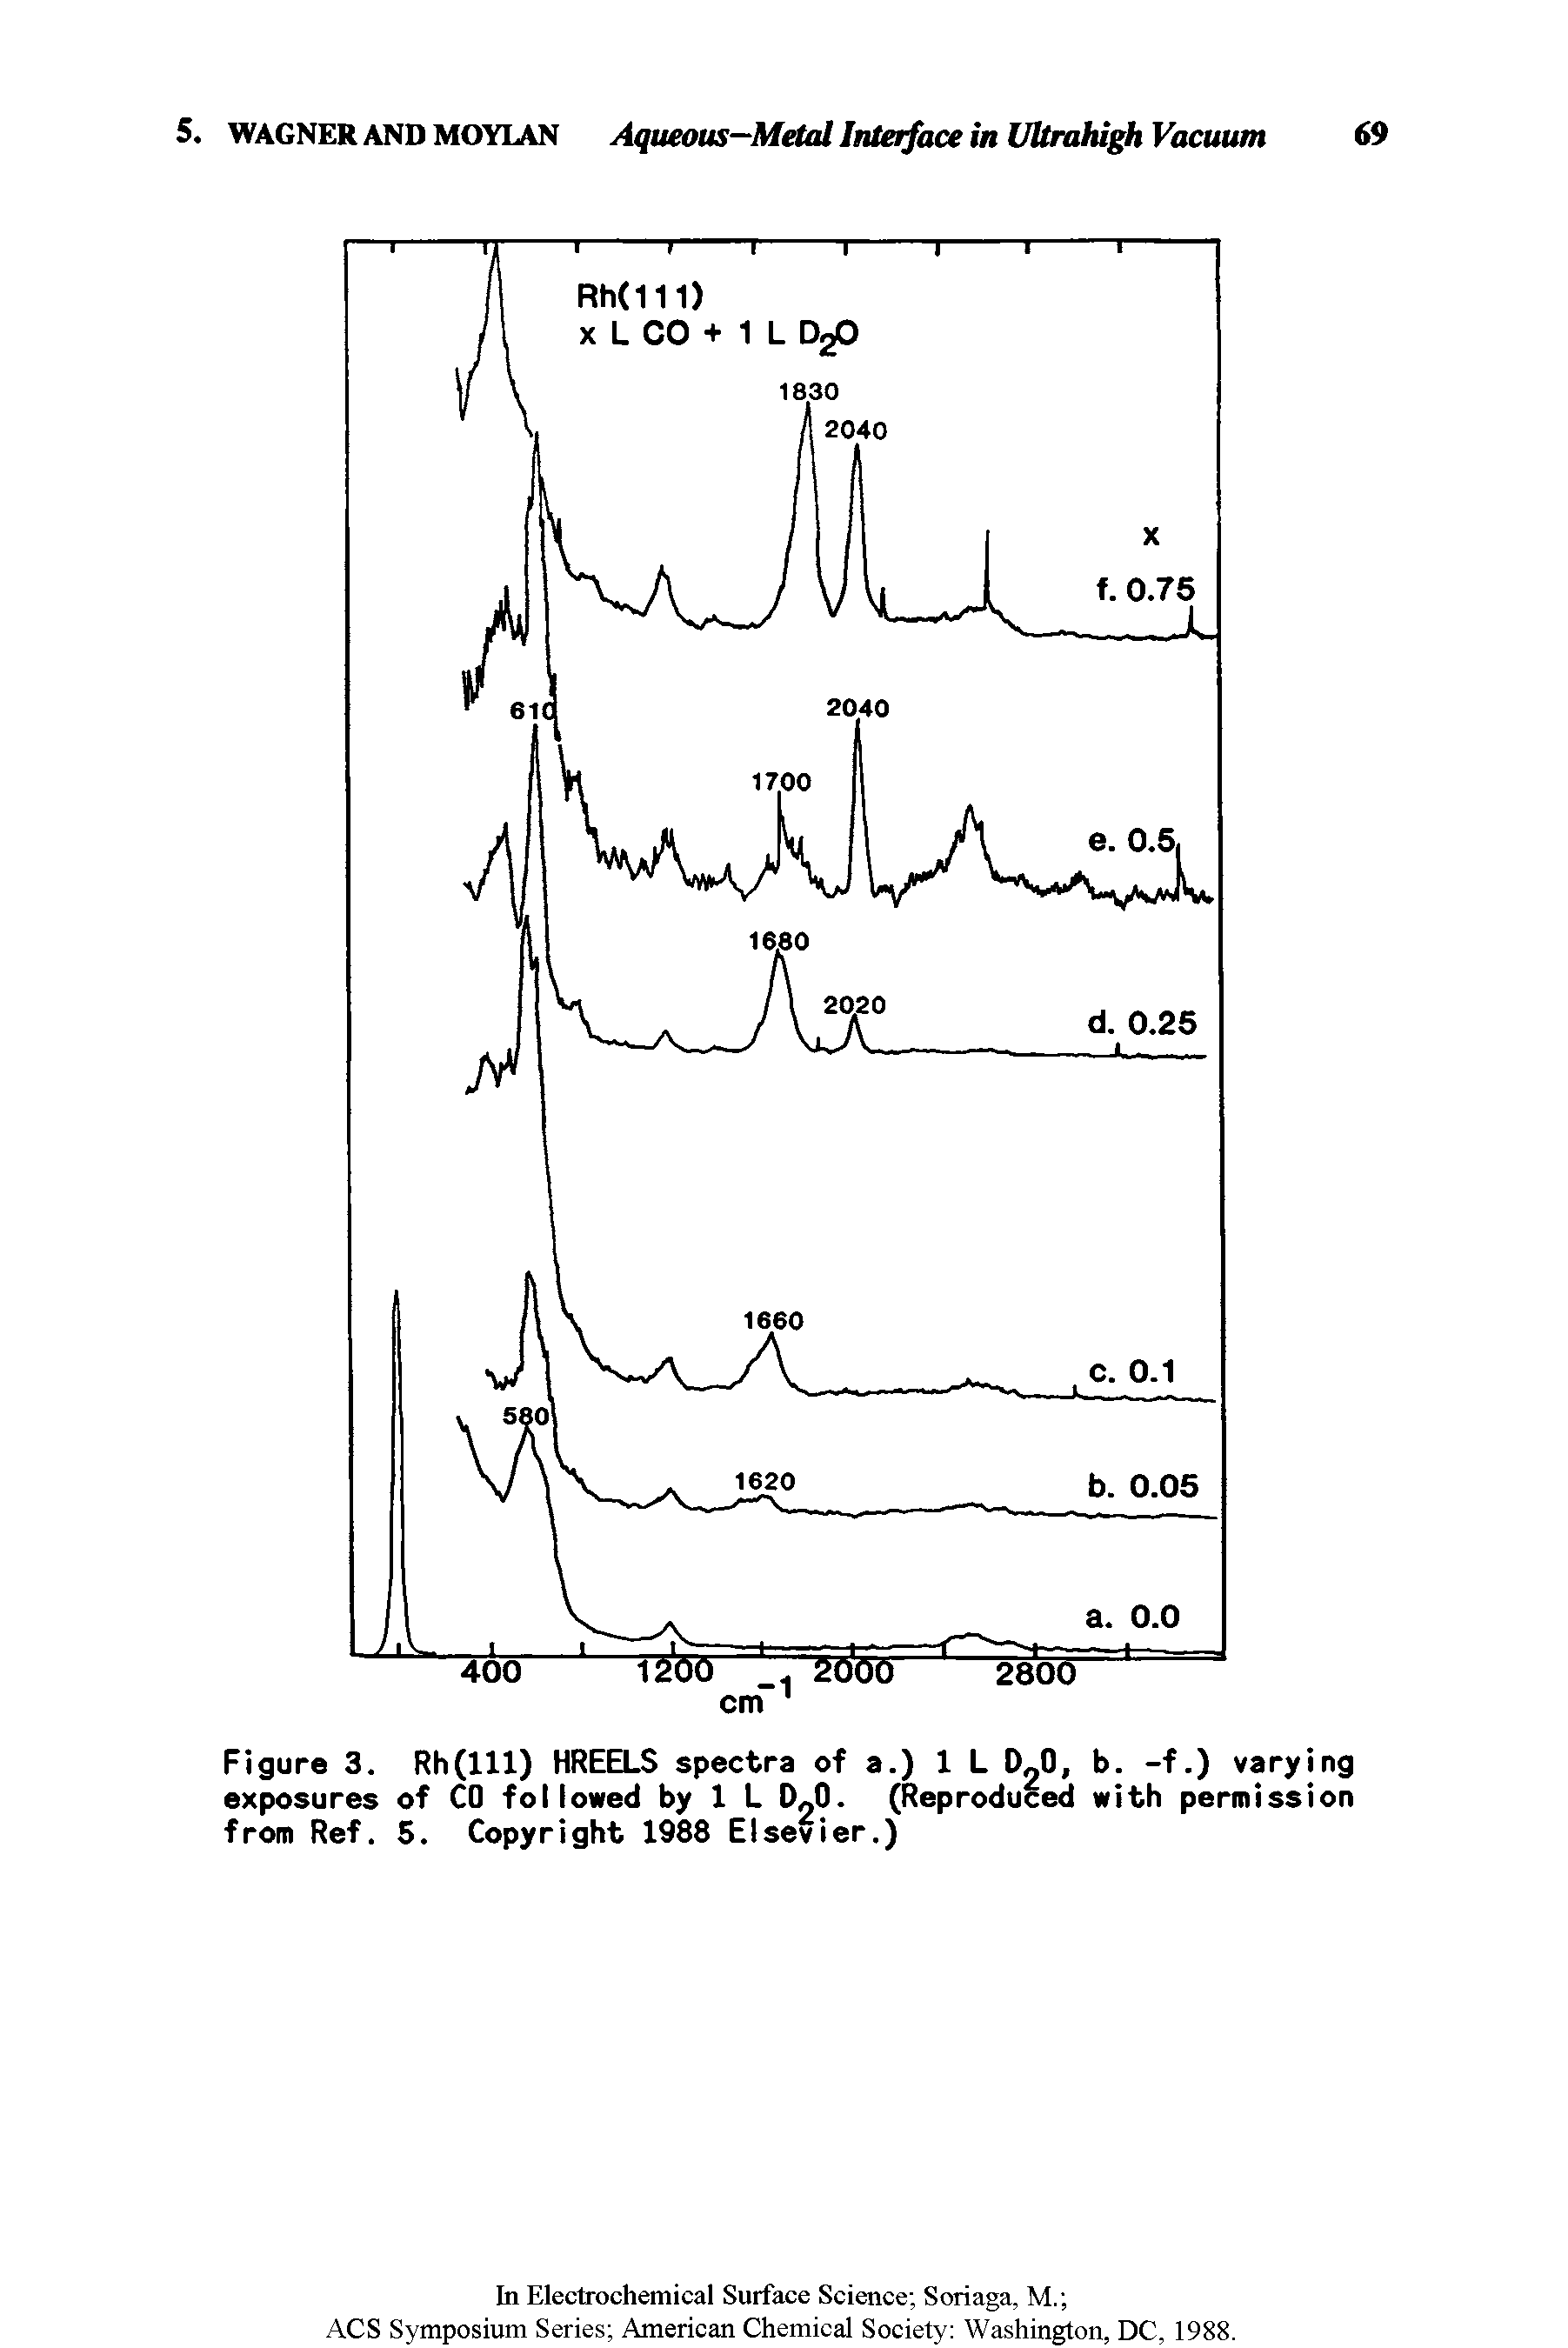 Figure 3. Rh(111) HREELS spectra of a.) 1 L D 0, b. -f.) varying exposures of CO followed by 1 L D O. (Reproduced with permission from Ref. 5. Copyright 1988 Elsevier.)...